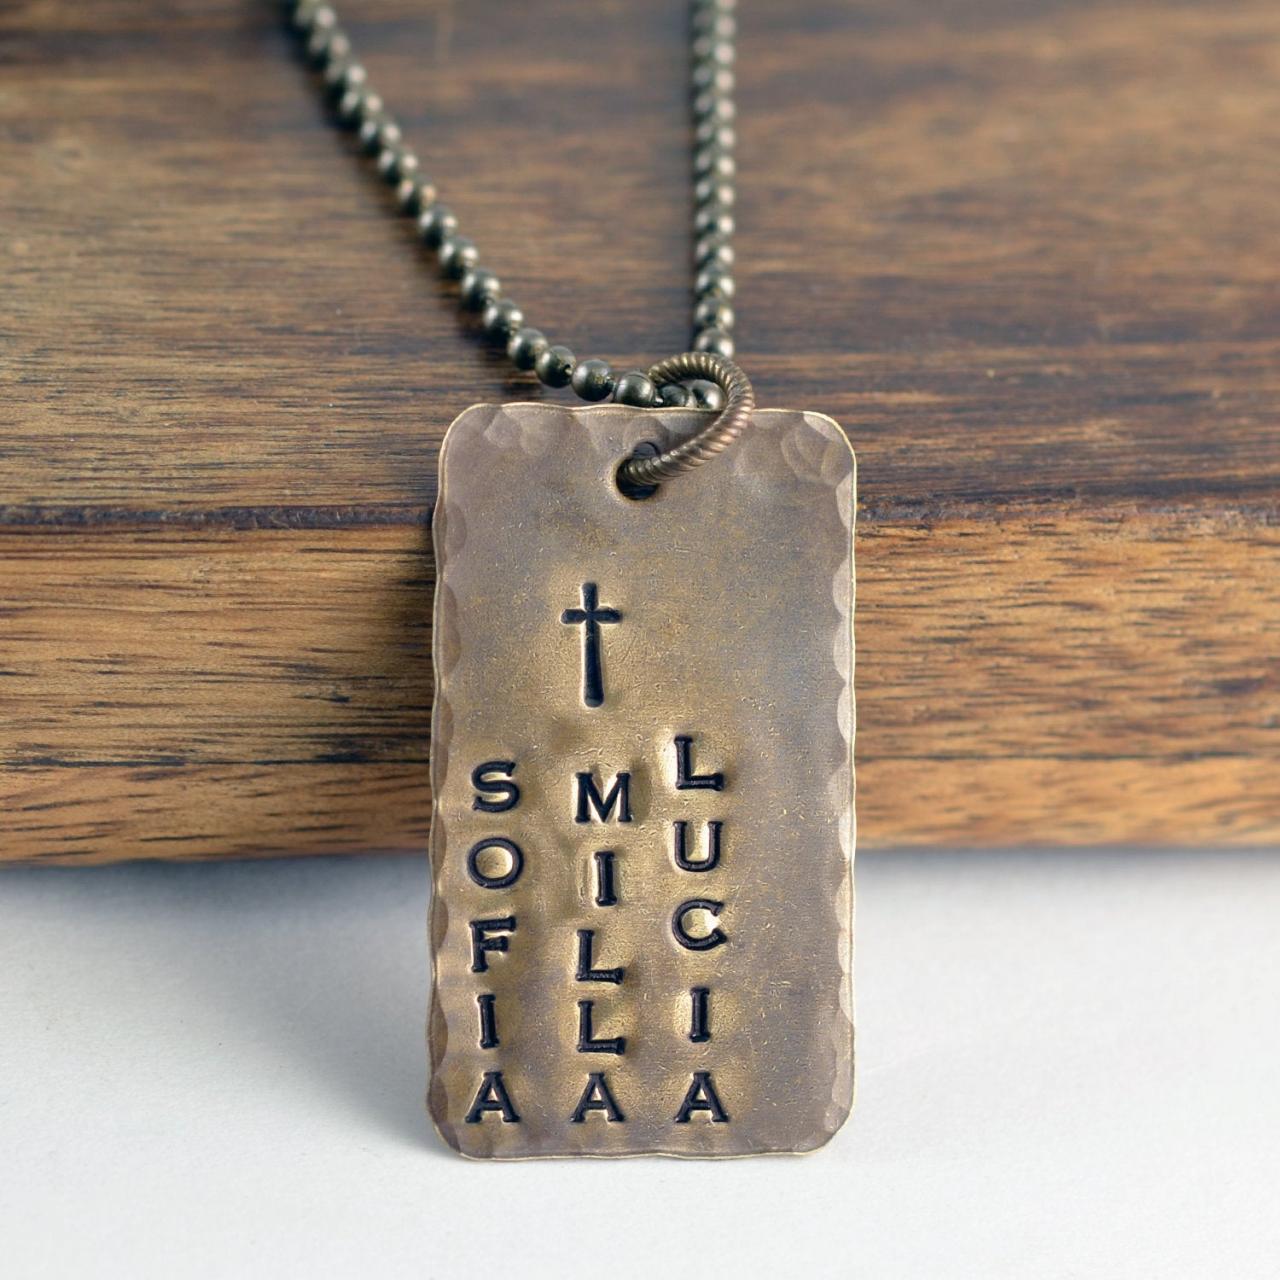 Mens Dog Tag Necklace - Hand Stamped Tag Necklace - Personalized Mens Necklace - Mens Necklace - Mens Jewelry - Fathers Day Gift